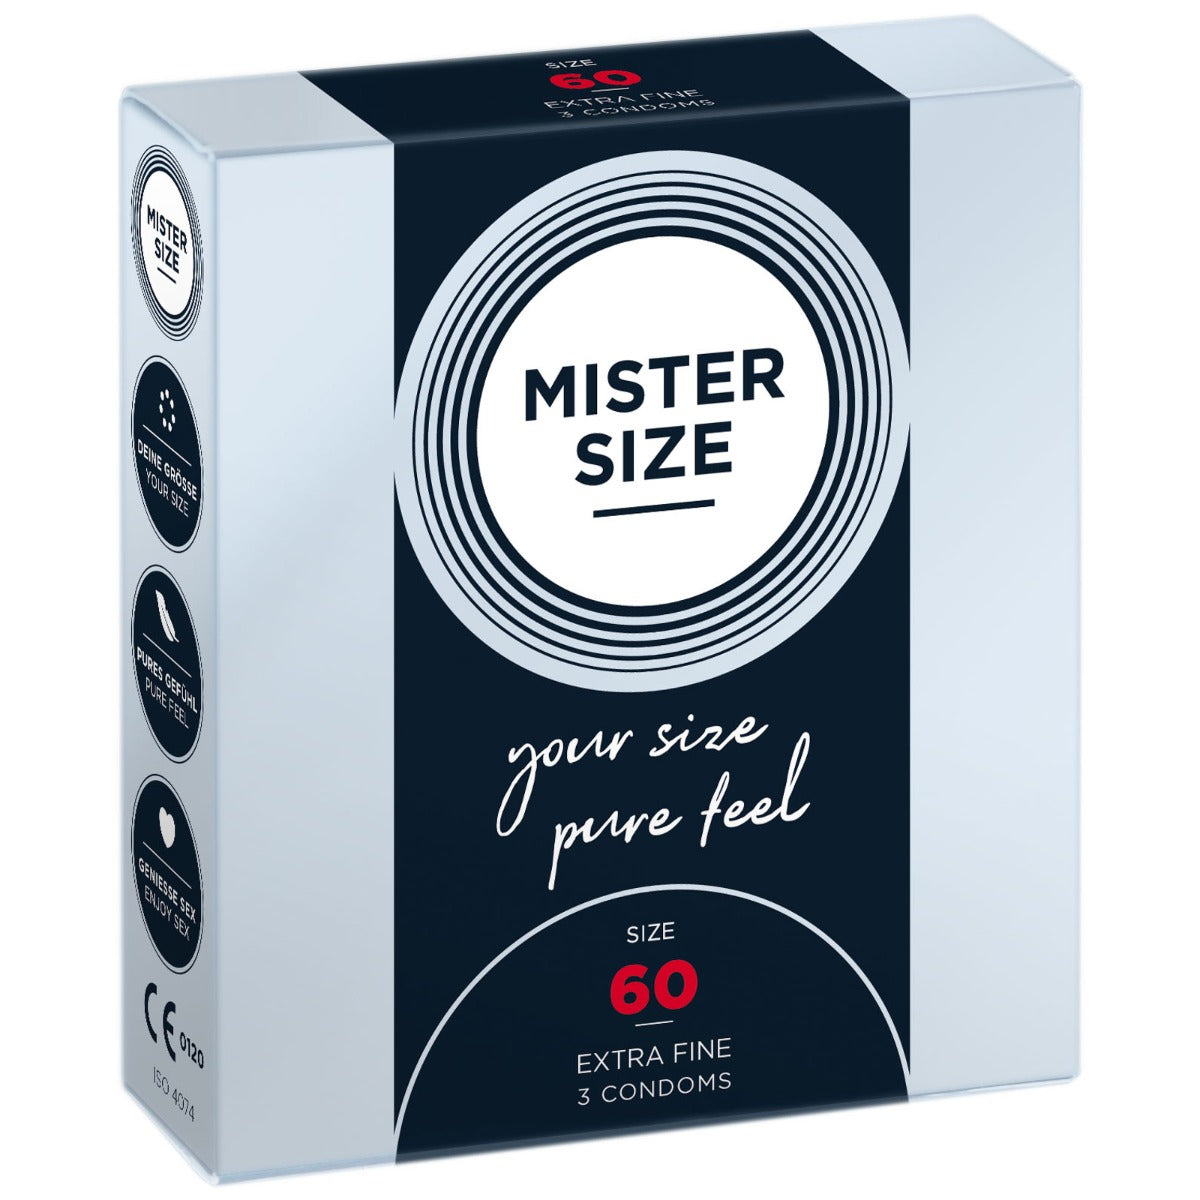 Mister Size Pure Feel Condoms Size 60mm 3 Pack